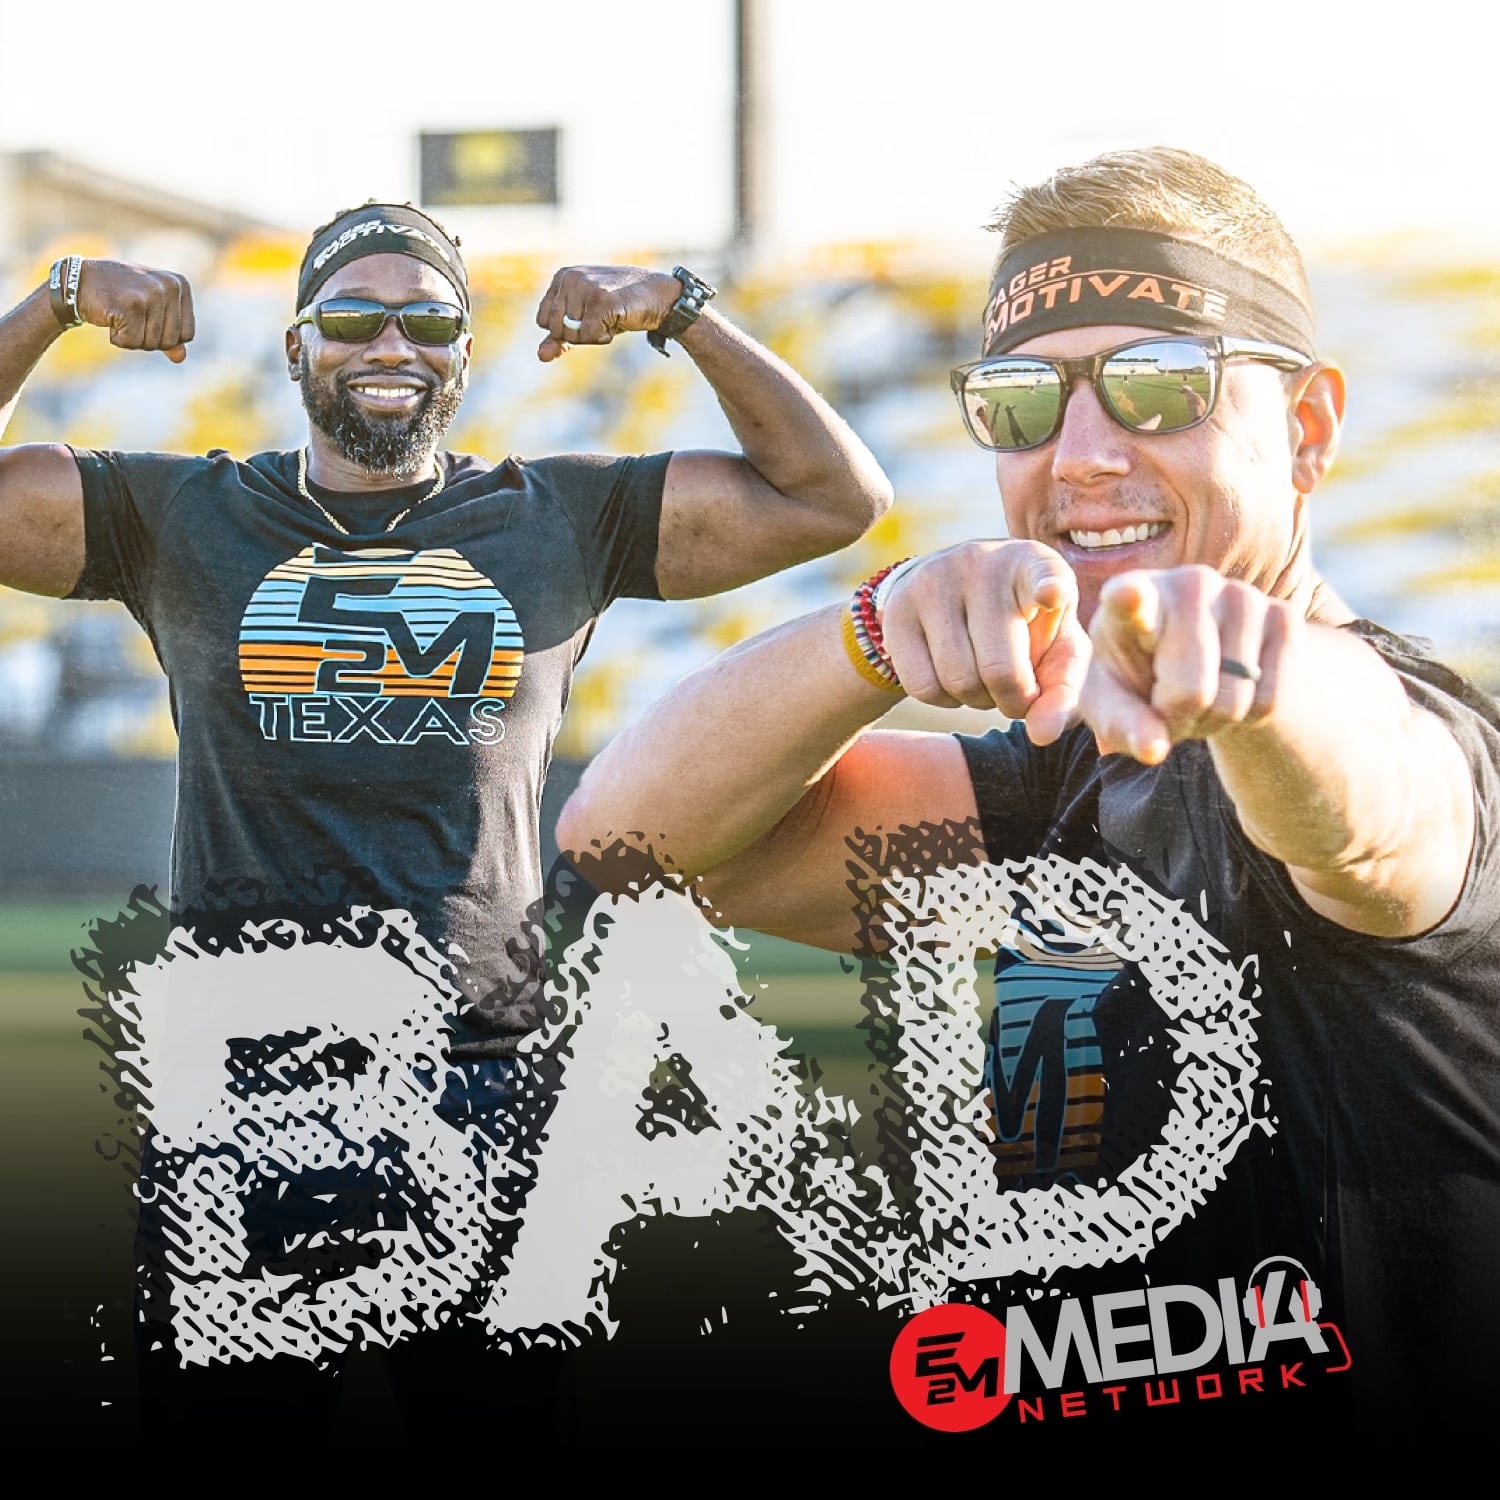 E2M Fitness Network Media – BAD Podcast – You’re One Away “When you can’t see the destination, don’t stop”